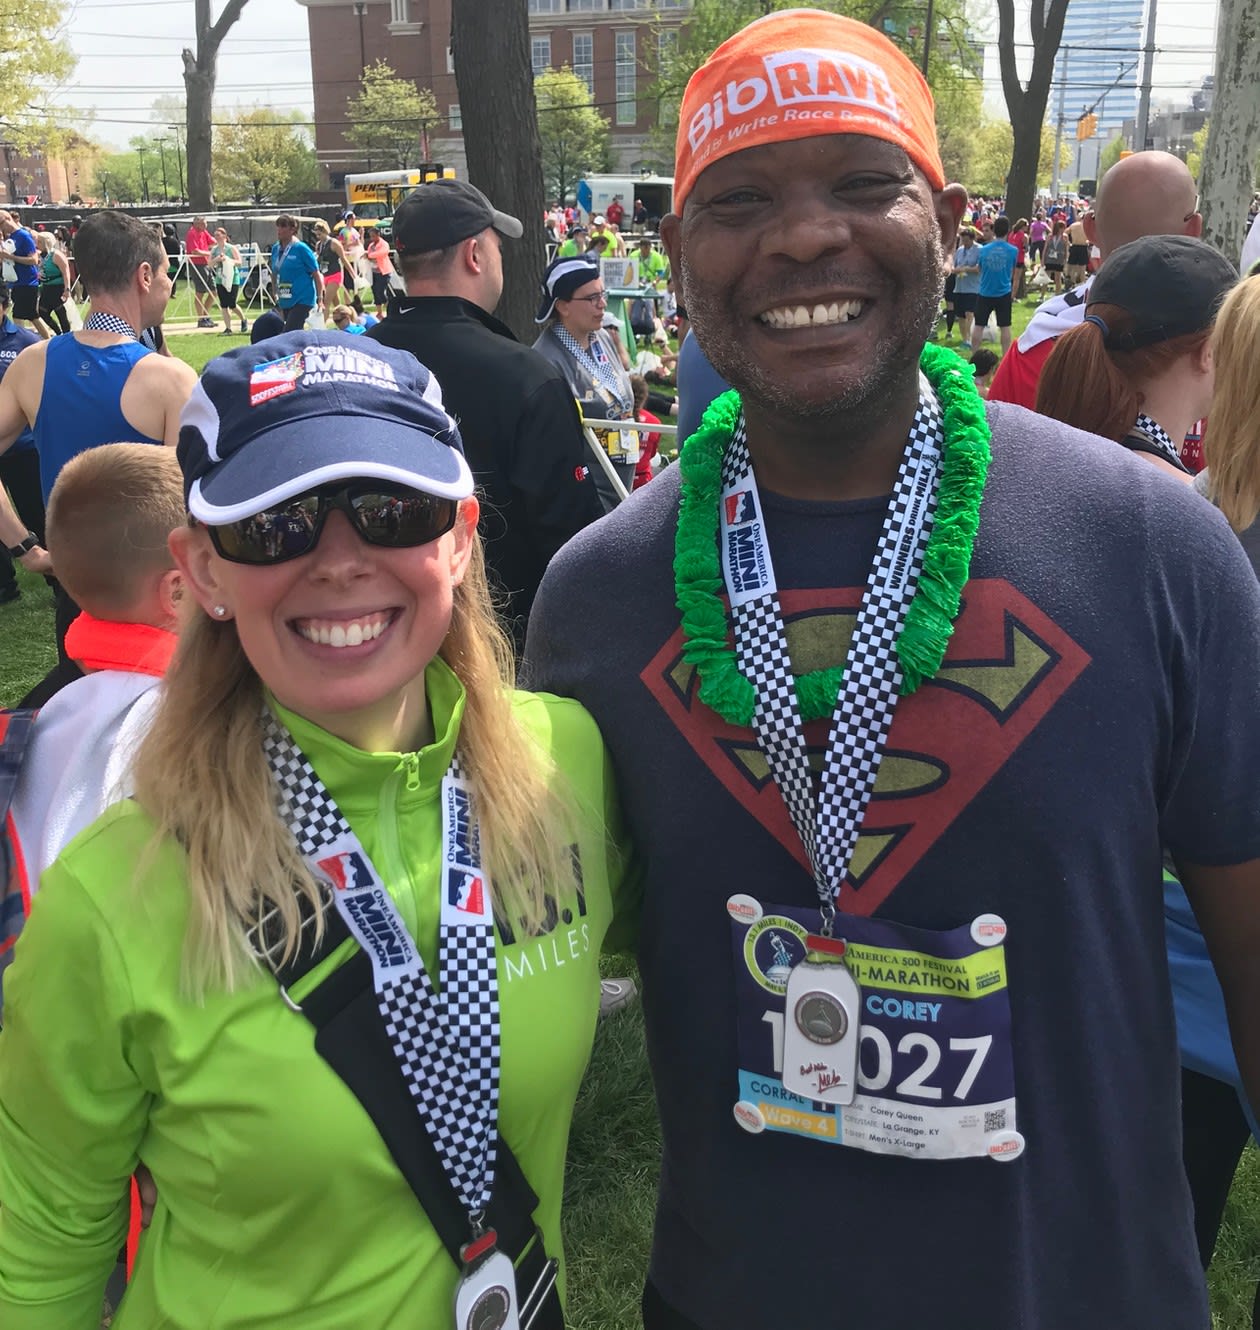 A black runner speaks out on Ahmaud Arbery, racism and healing